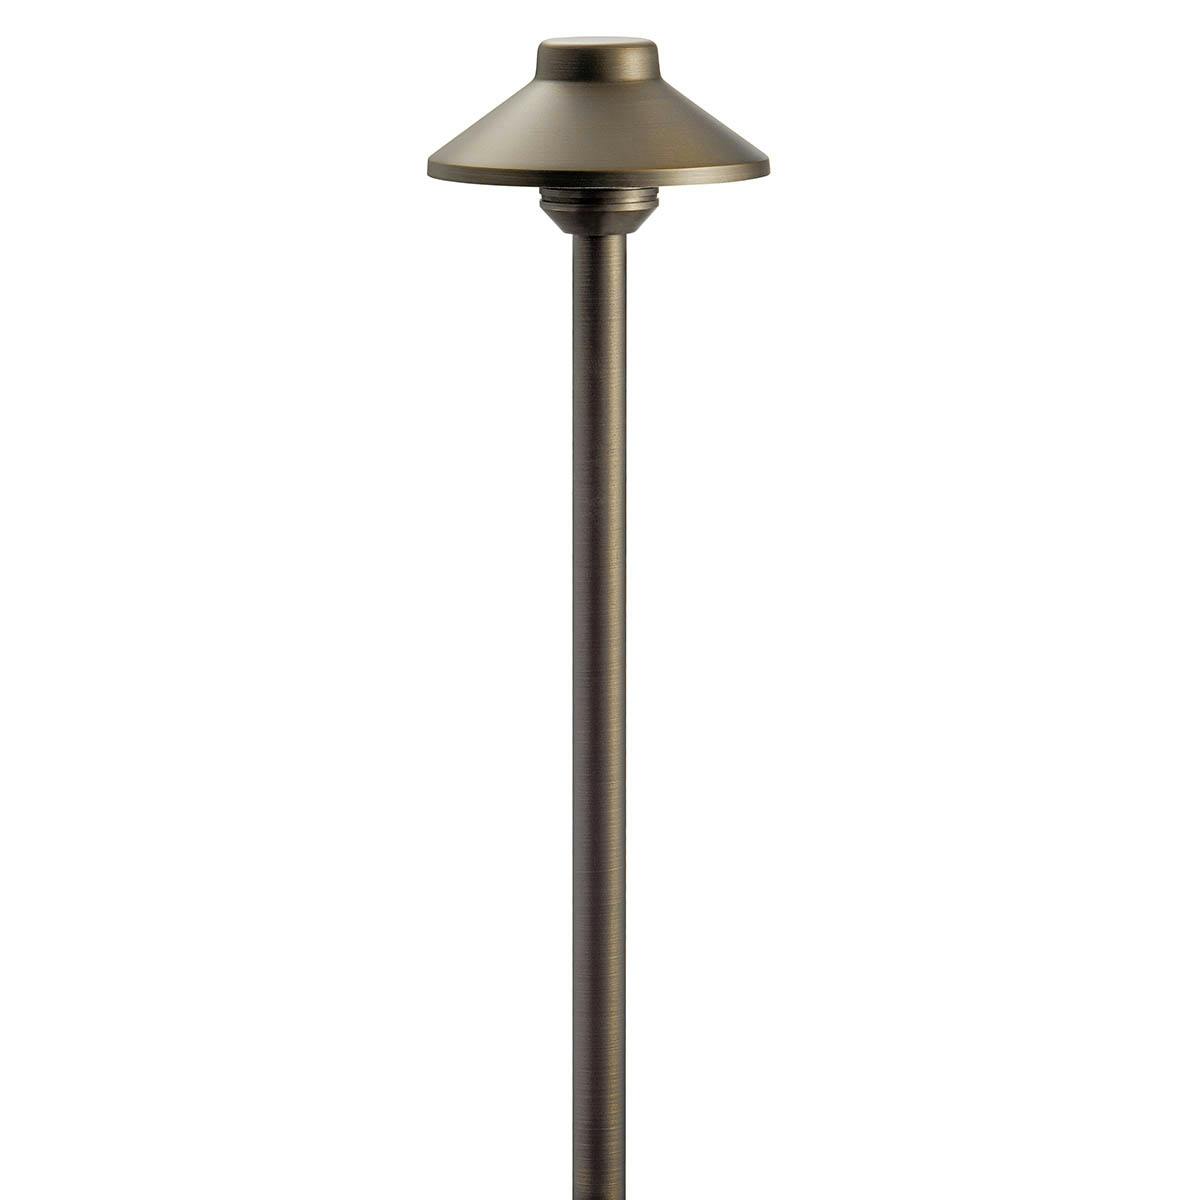 Stepped Dome Path Light Centennial Brass on a white background